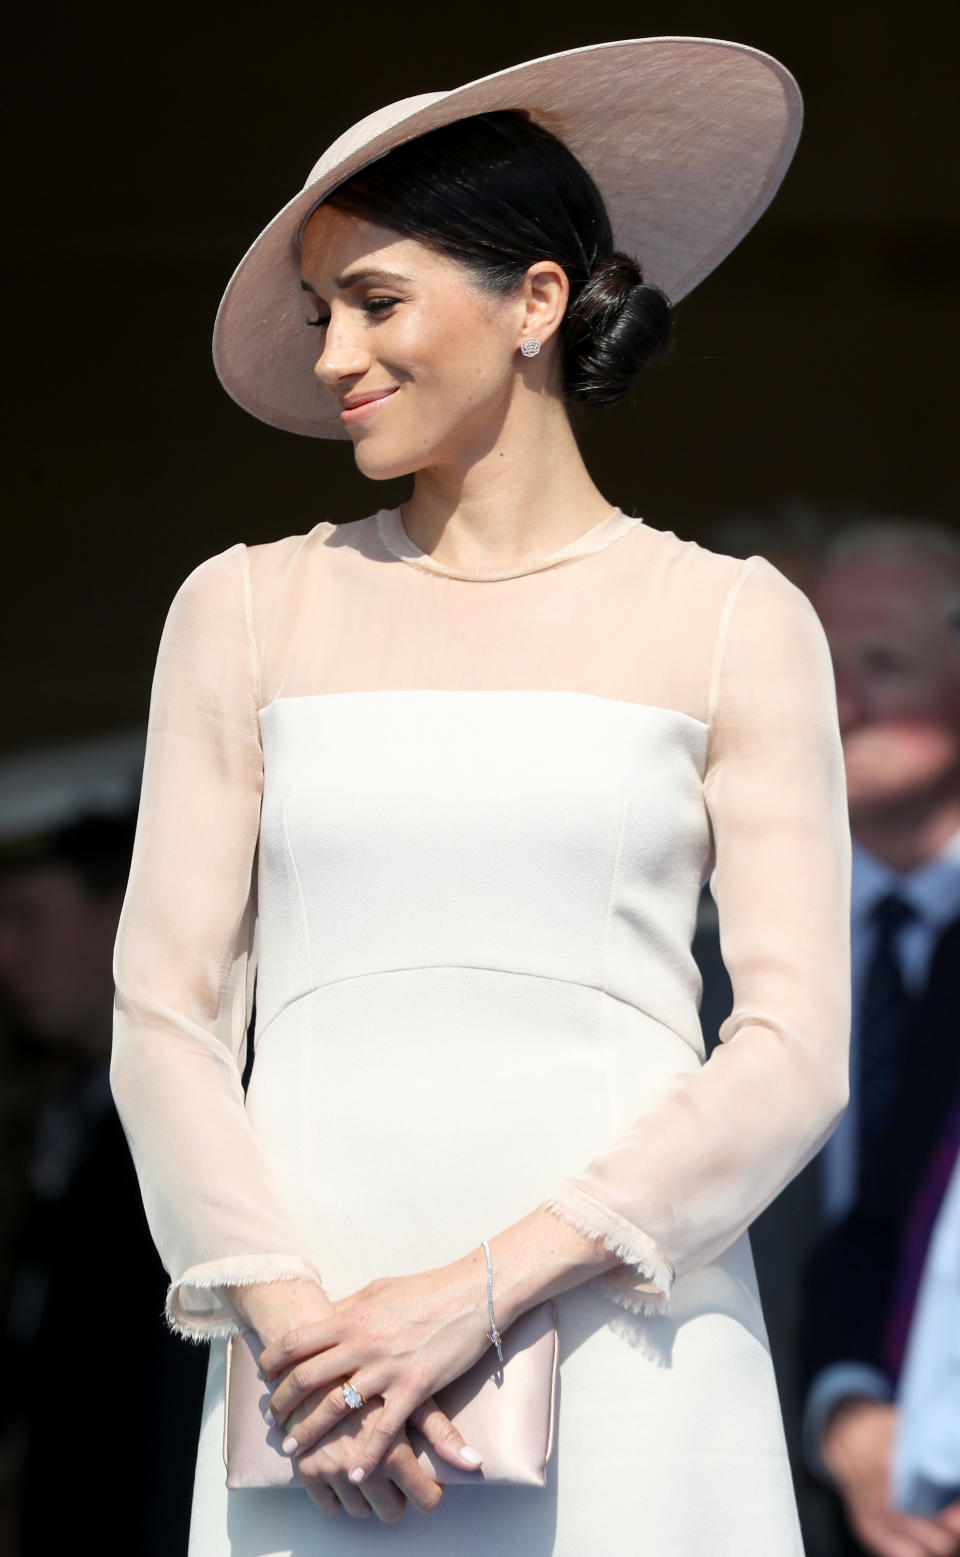 <p>After the wedding, the interest in the Duchess of Sussex only grew.<br><br>For her first appearance as royalty – Prince Charle’s birthday garden party at Buckingham Palace – Meghan’s selling power was proven after the website for the label she was wearing, Goat, crashed.<br><br>Her peachy dress by the British label then proceeded to sell out in minutes, and so the Meghan Effect was running at full steam ahead…<br>[Photo: Getty] </p>